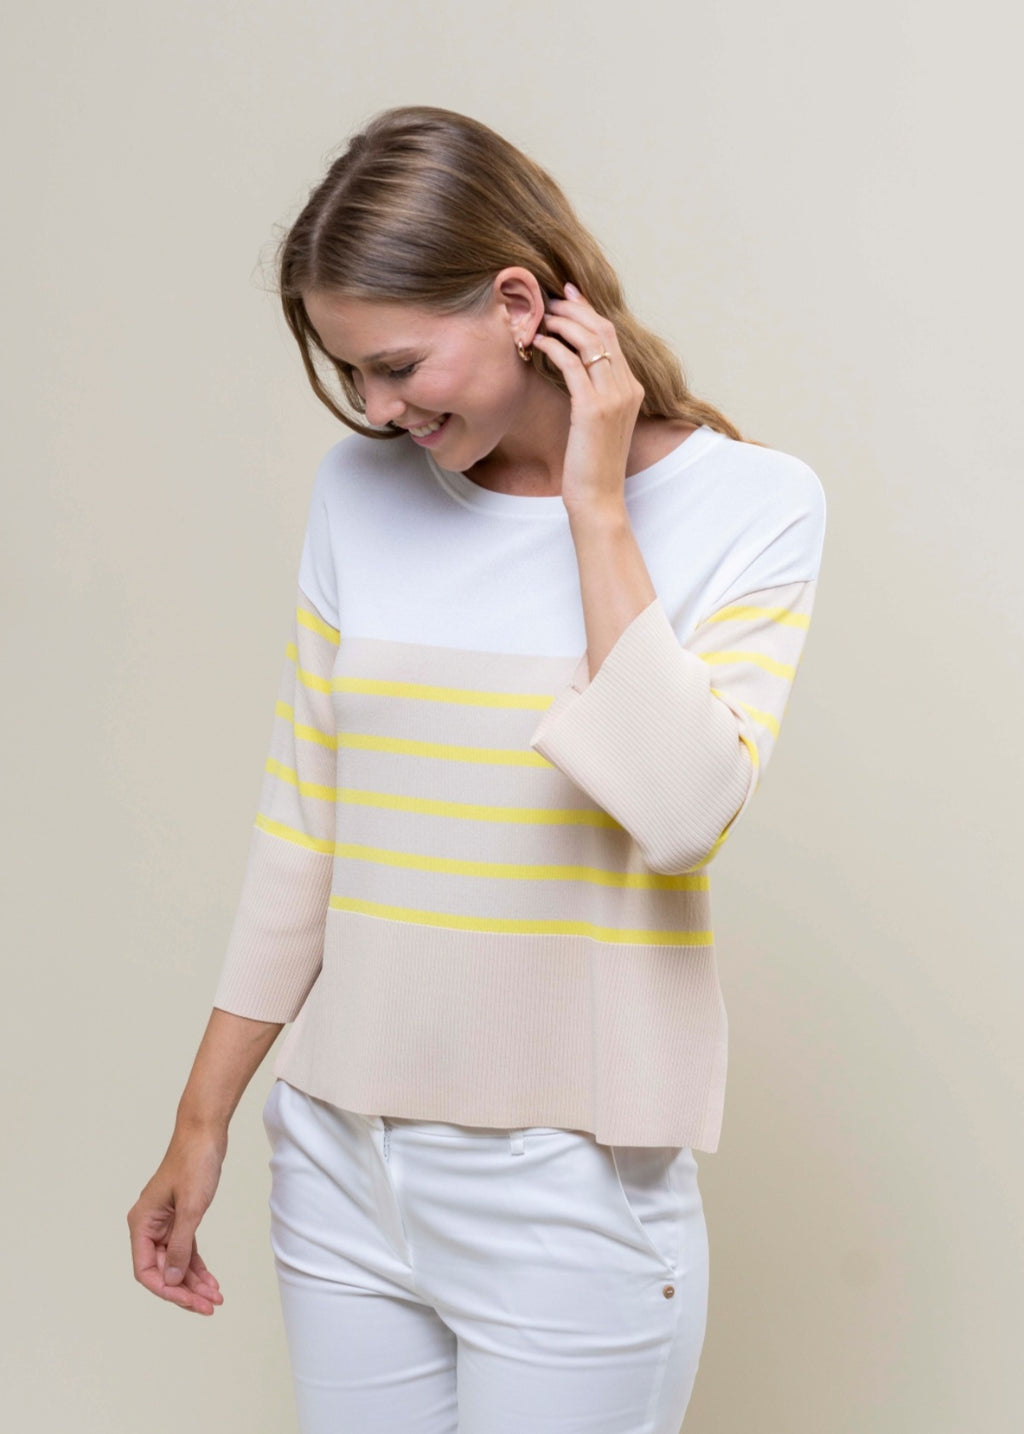 <p>Hongo yellow horizontal striped light knit top in beige and cream with 3/4 Bell sleeves</p>
<p>Product code JL02H501</p>